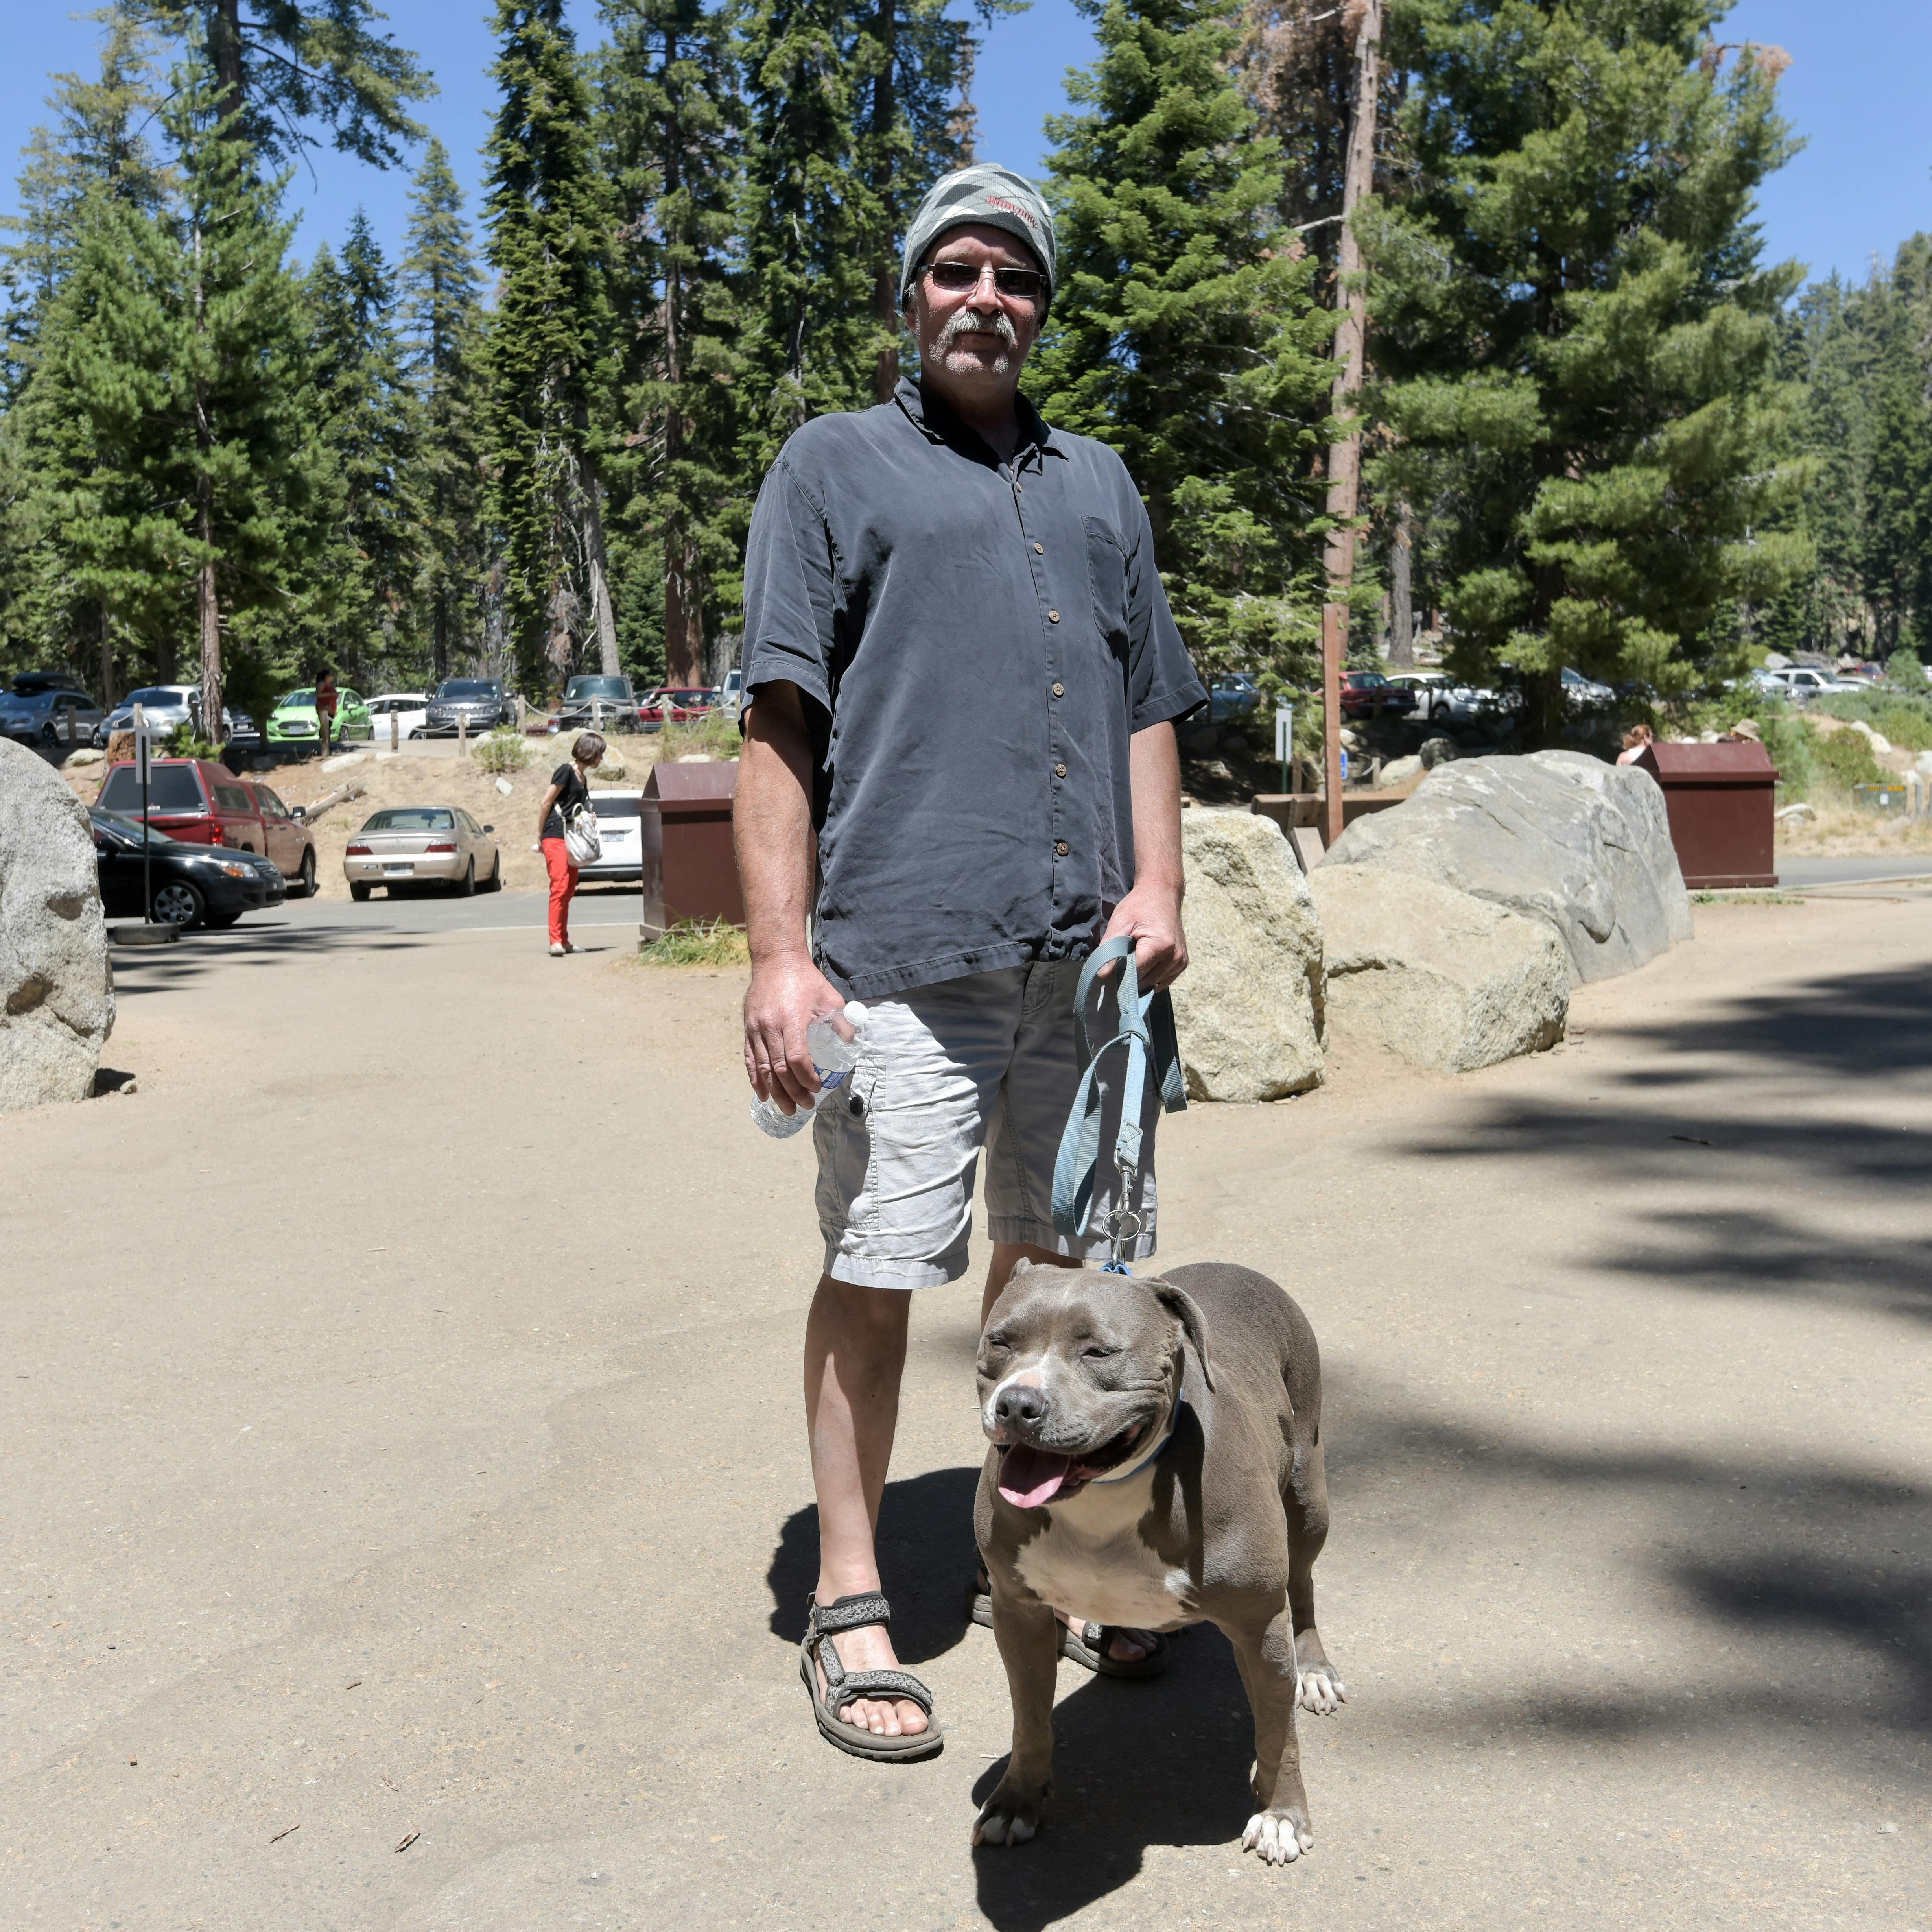 A man and his dog near the Visitor Center in Sequoia National Park.